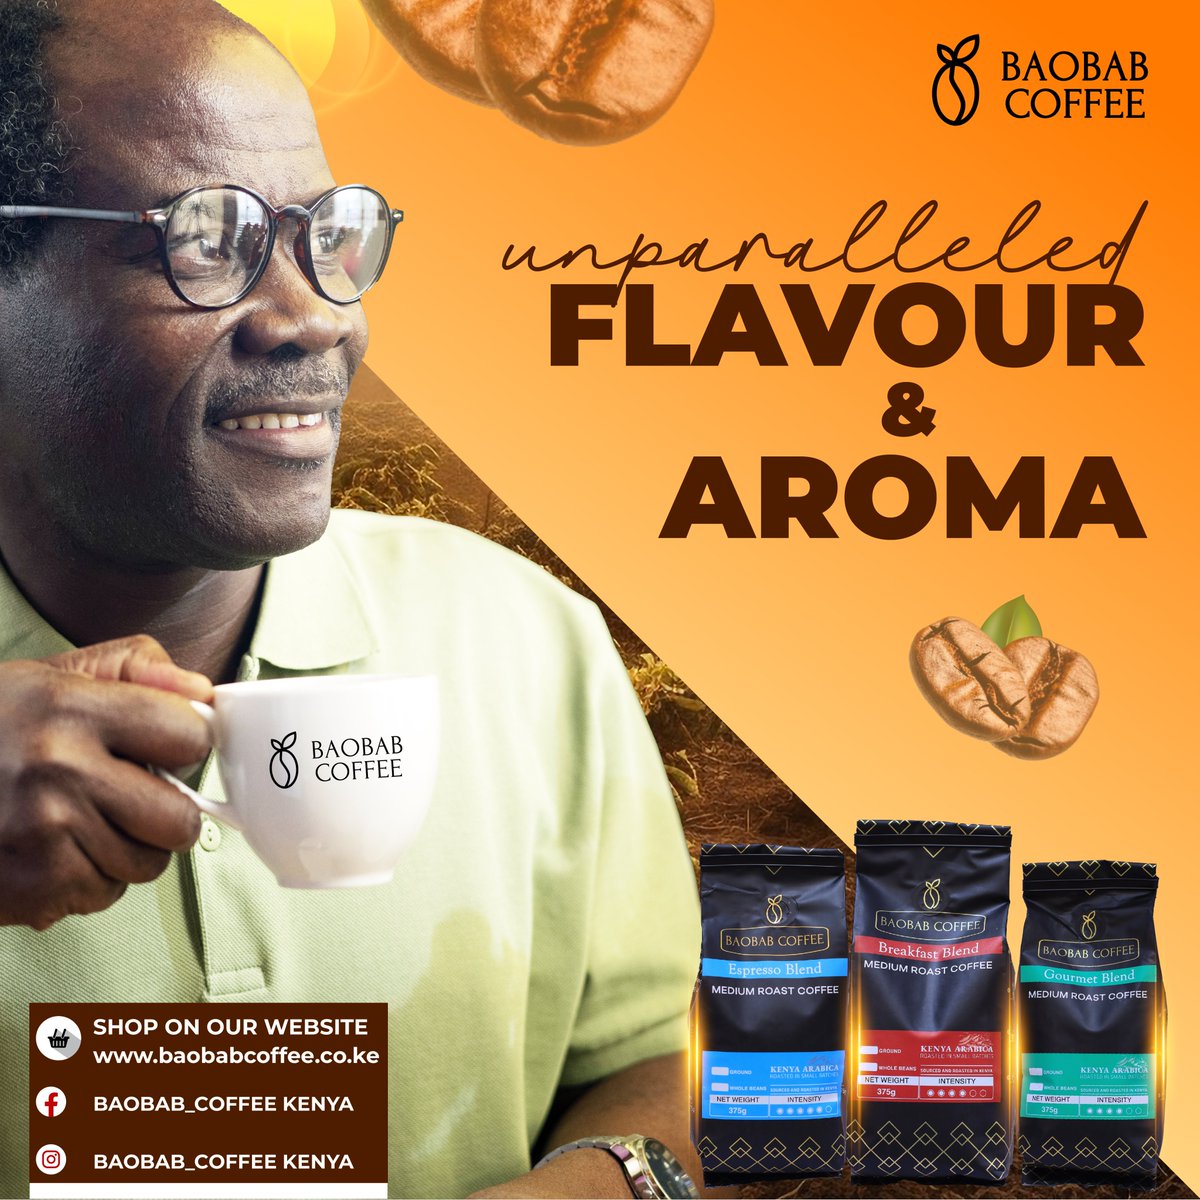 Indulge in coffee that is simply full of flavour and aroma. Get your hands on these unparalleled flavors today! Shop now on our website, through our social media platforms, or find us at select stores like @tushop_pamoja or @greenspoonke

#authenticflavors #coffee #coffeetime